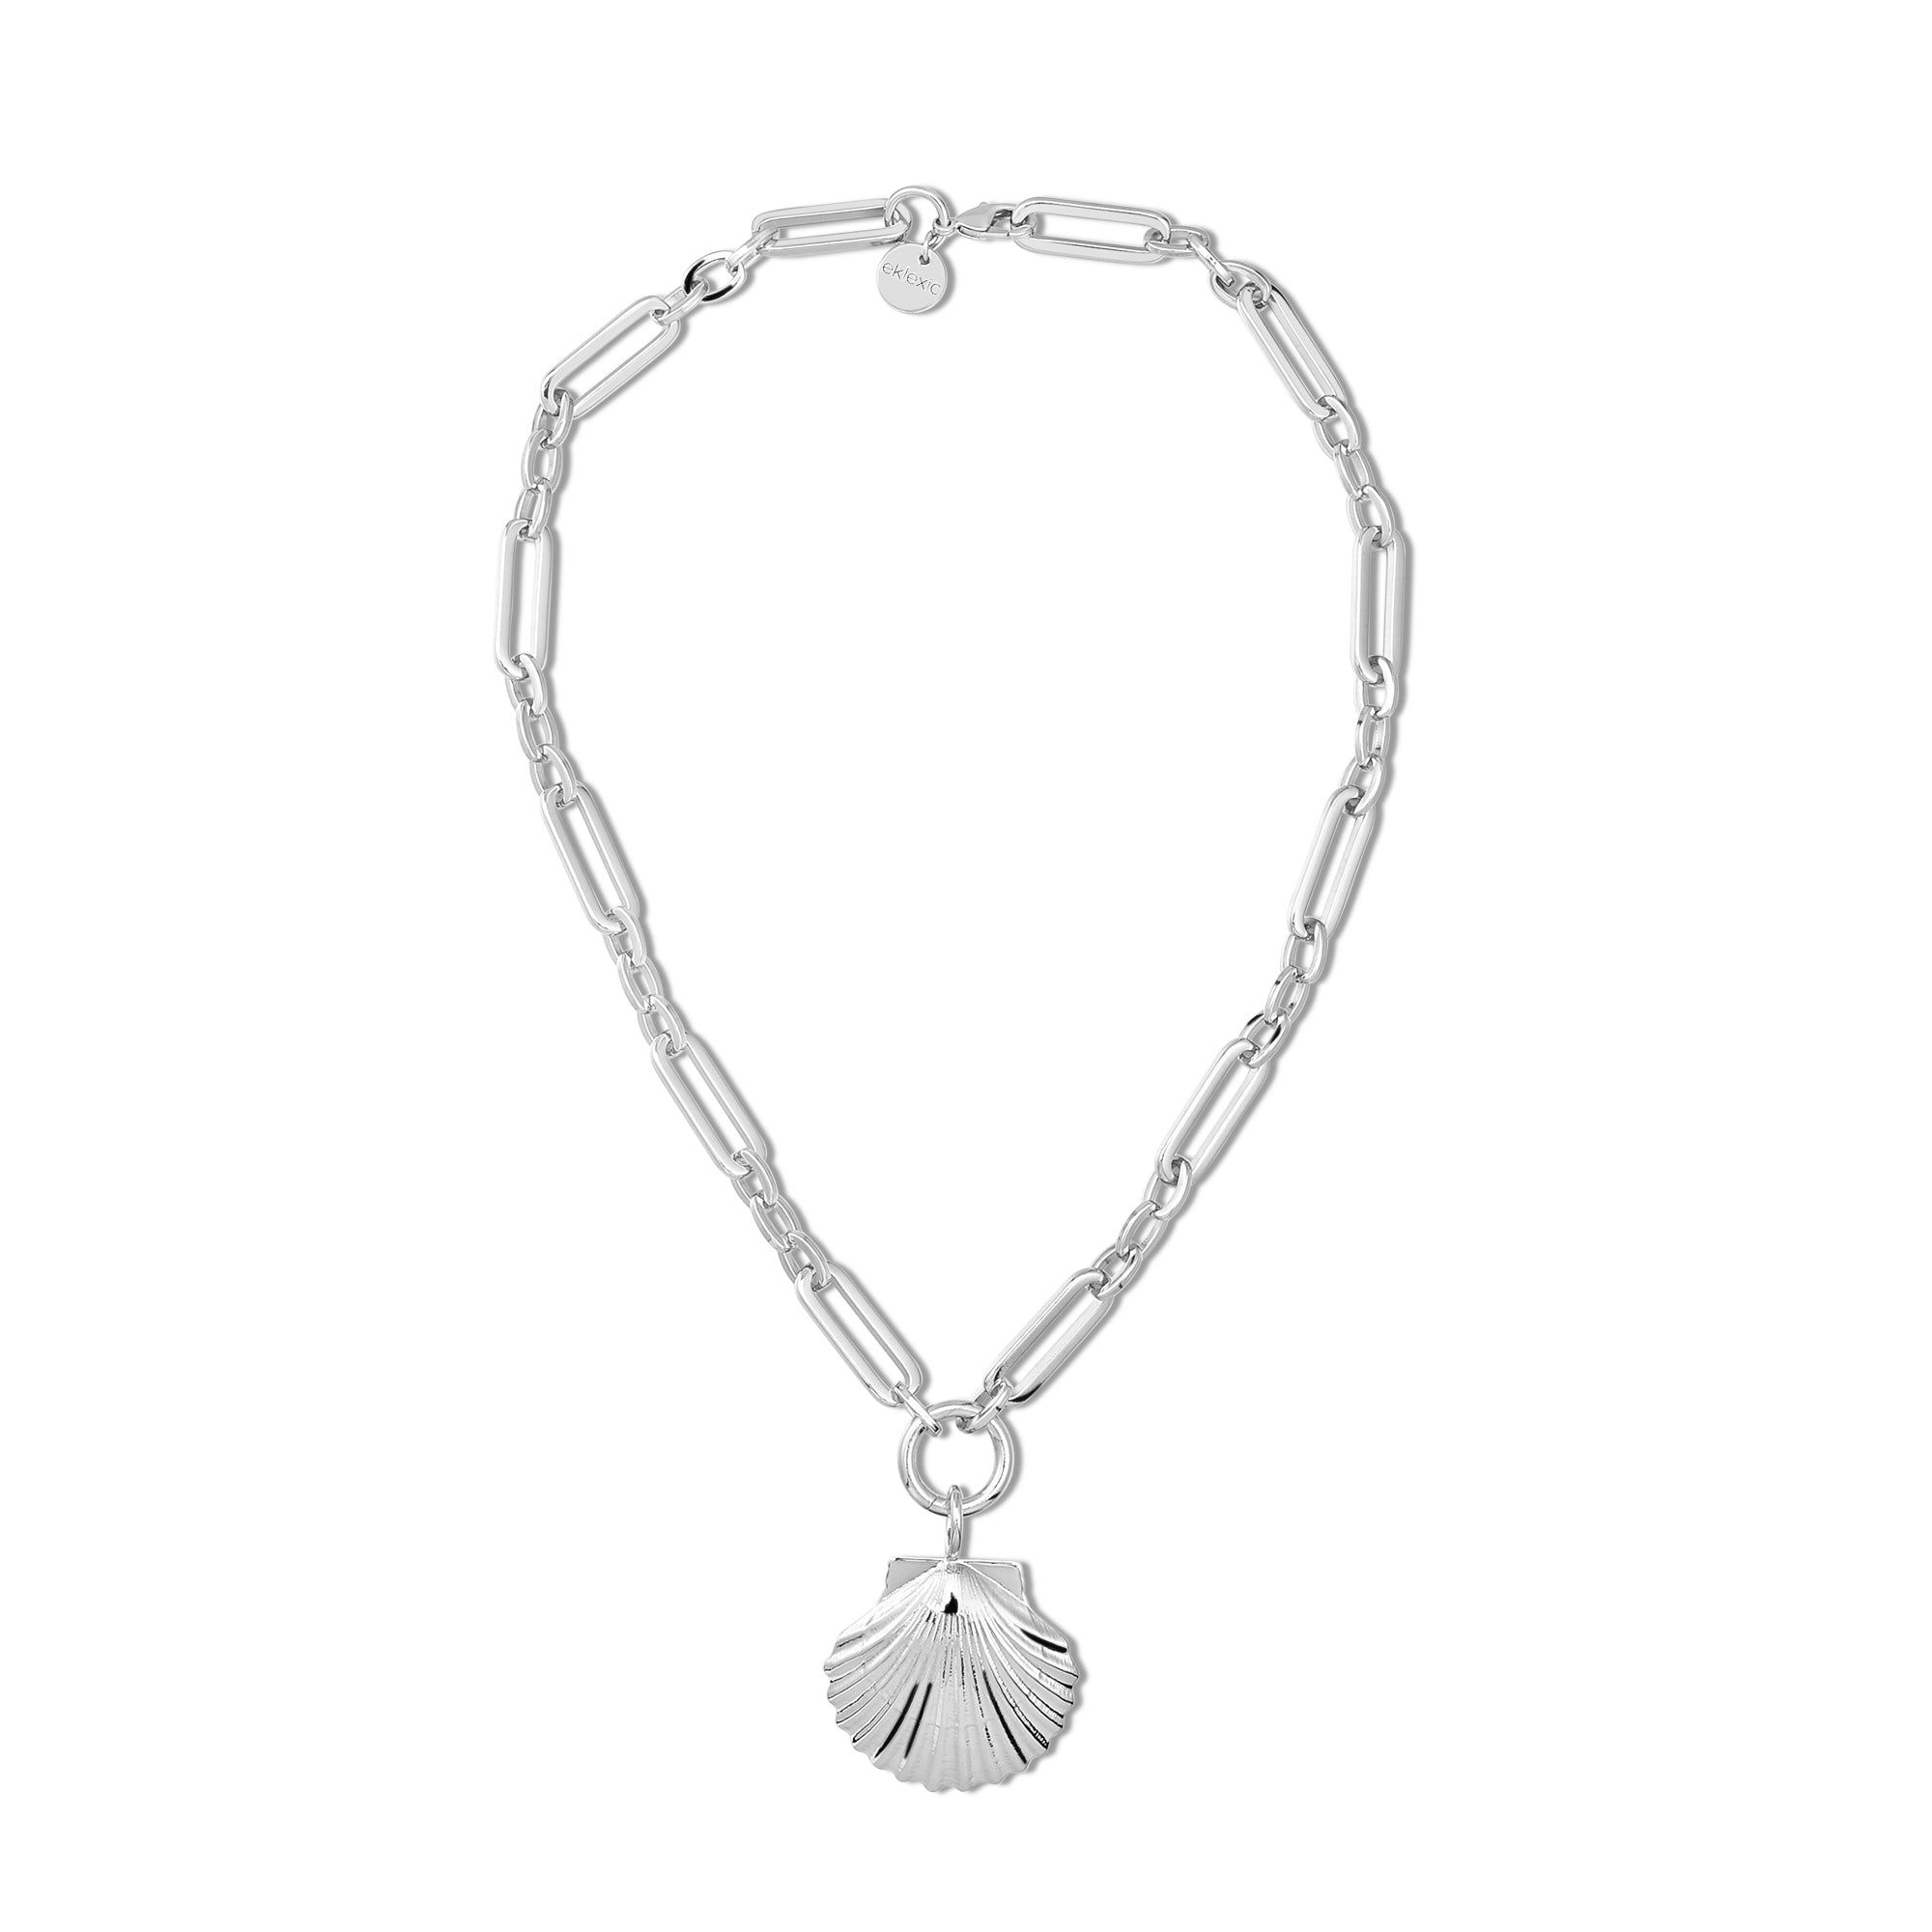 a silver necklace with a shell charm on it